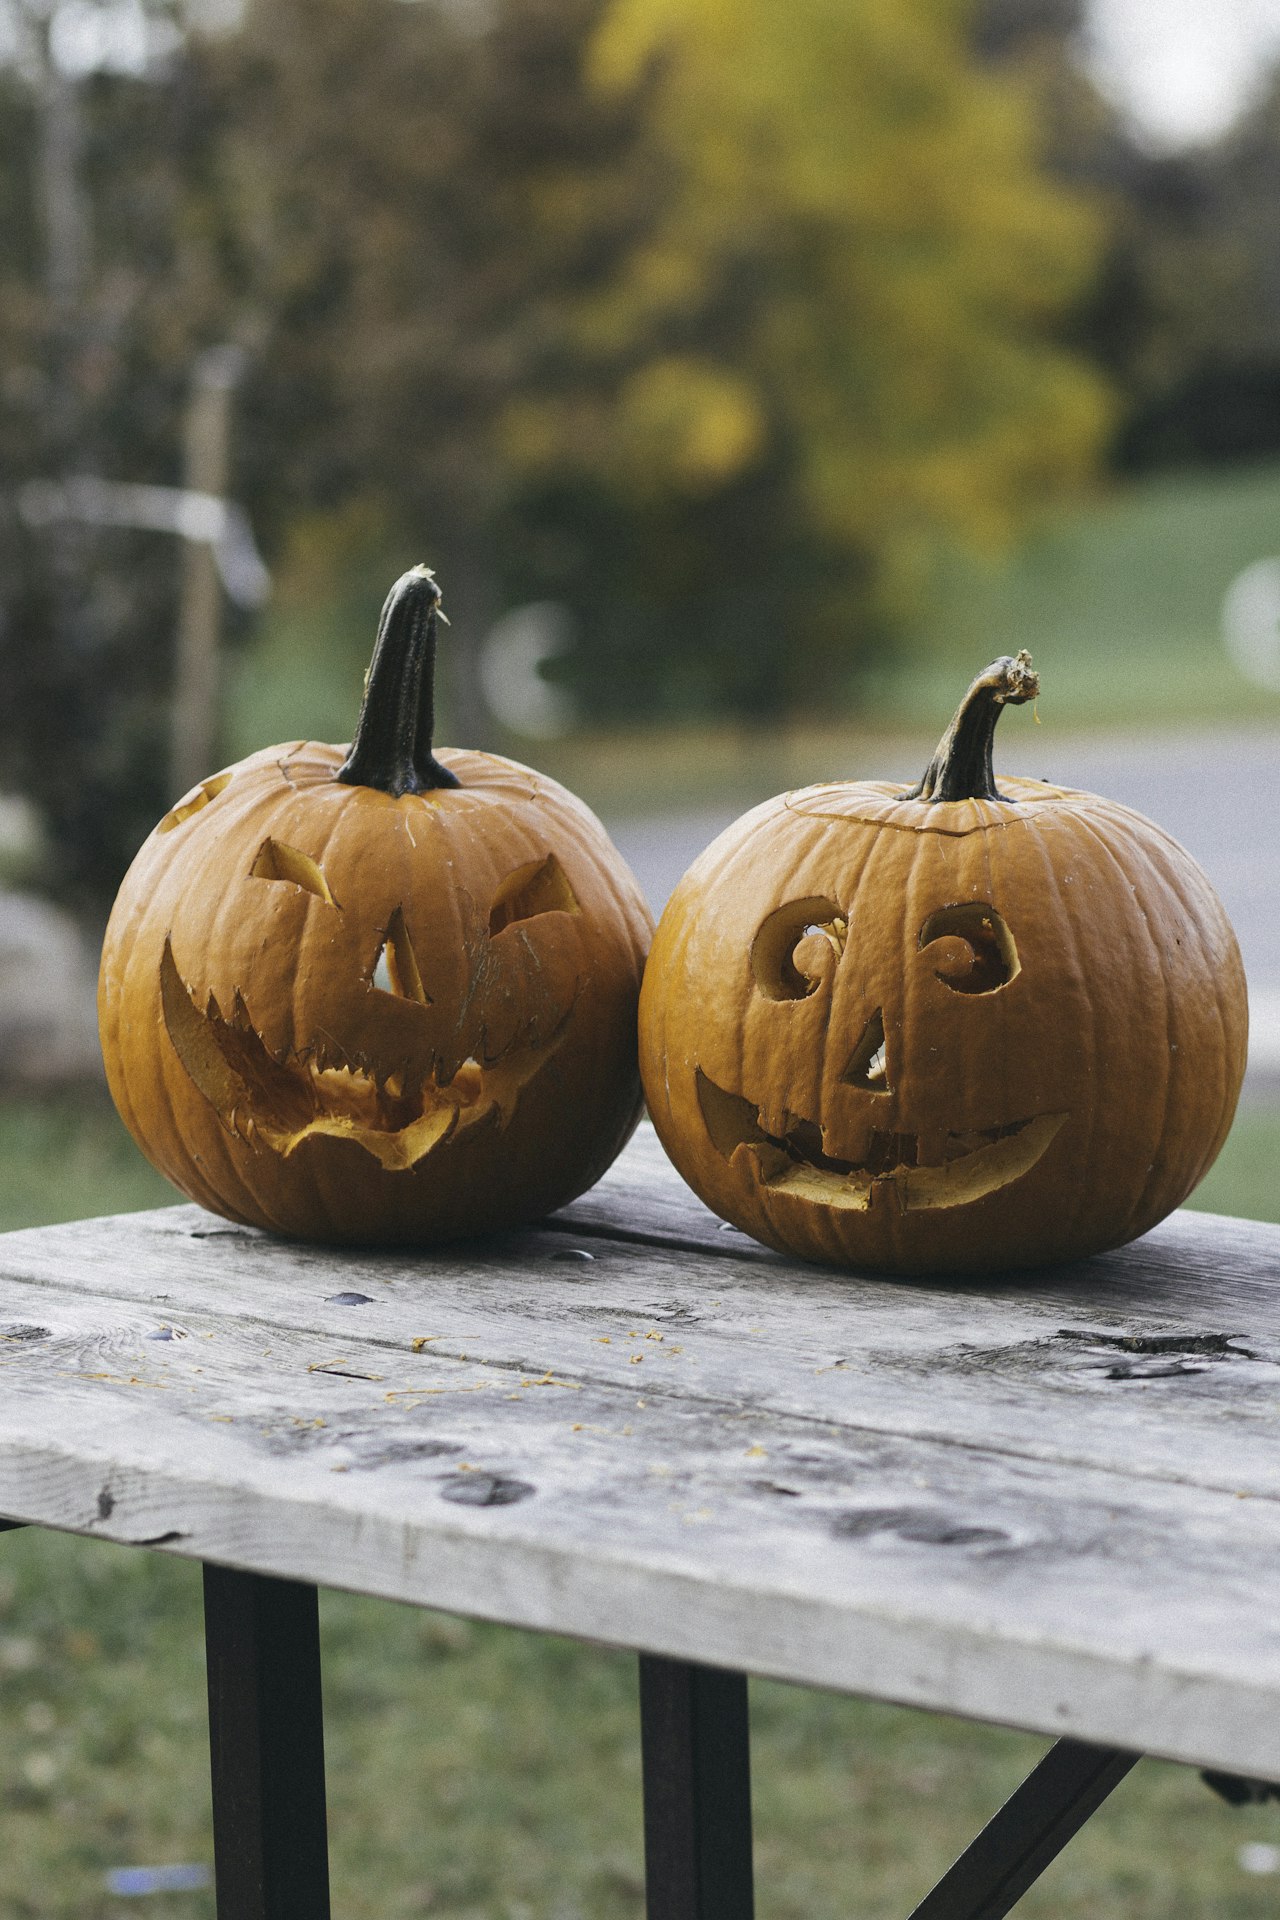 RE/MAX AGENTS ARE MAKING HALLOWEEN MORE ACCESSIBLE. 